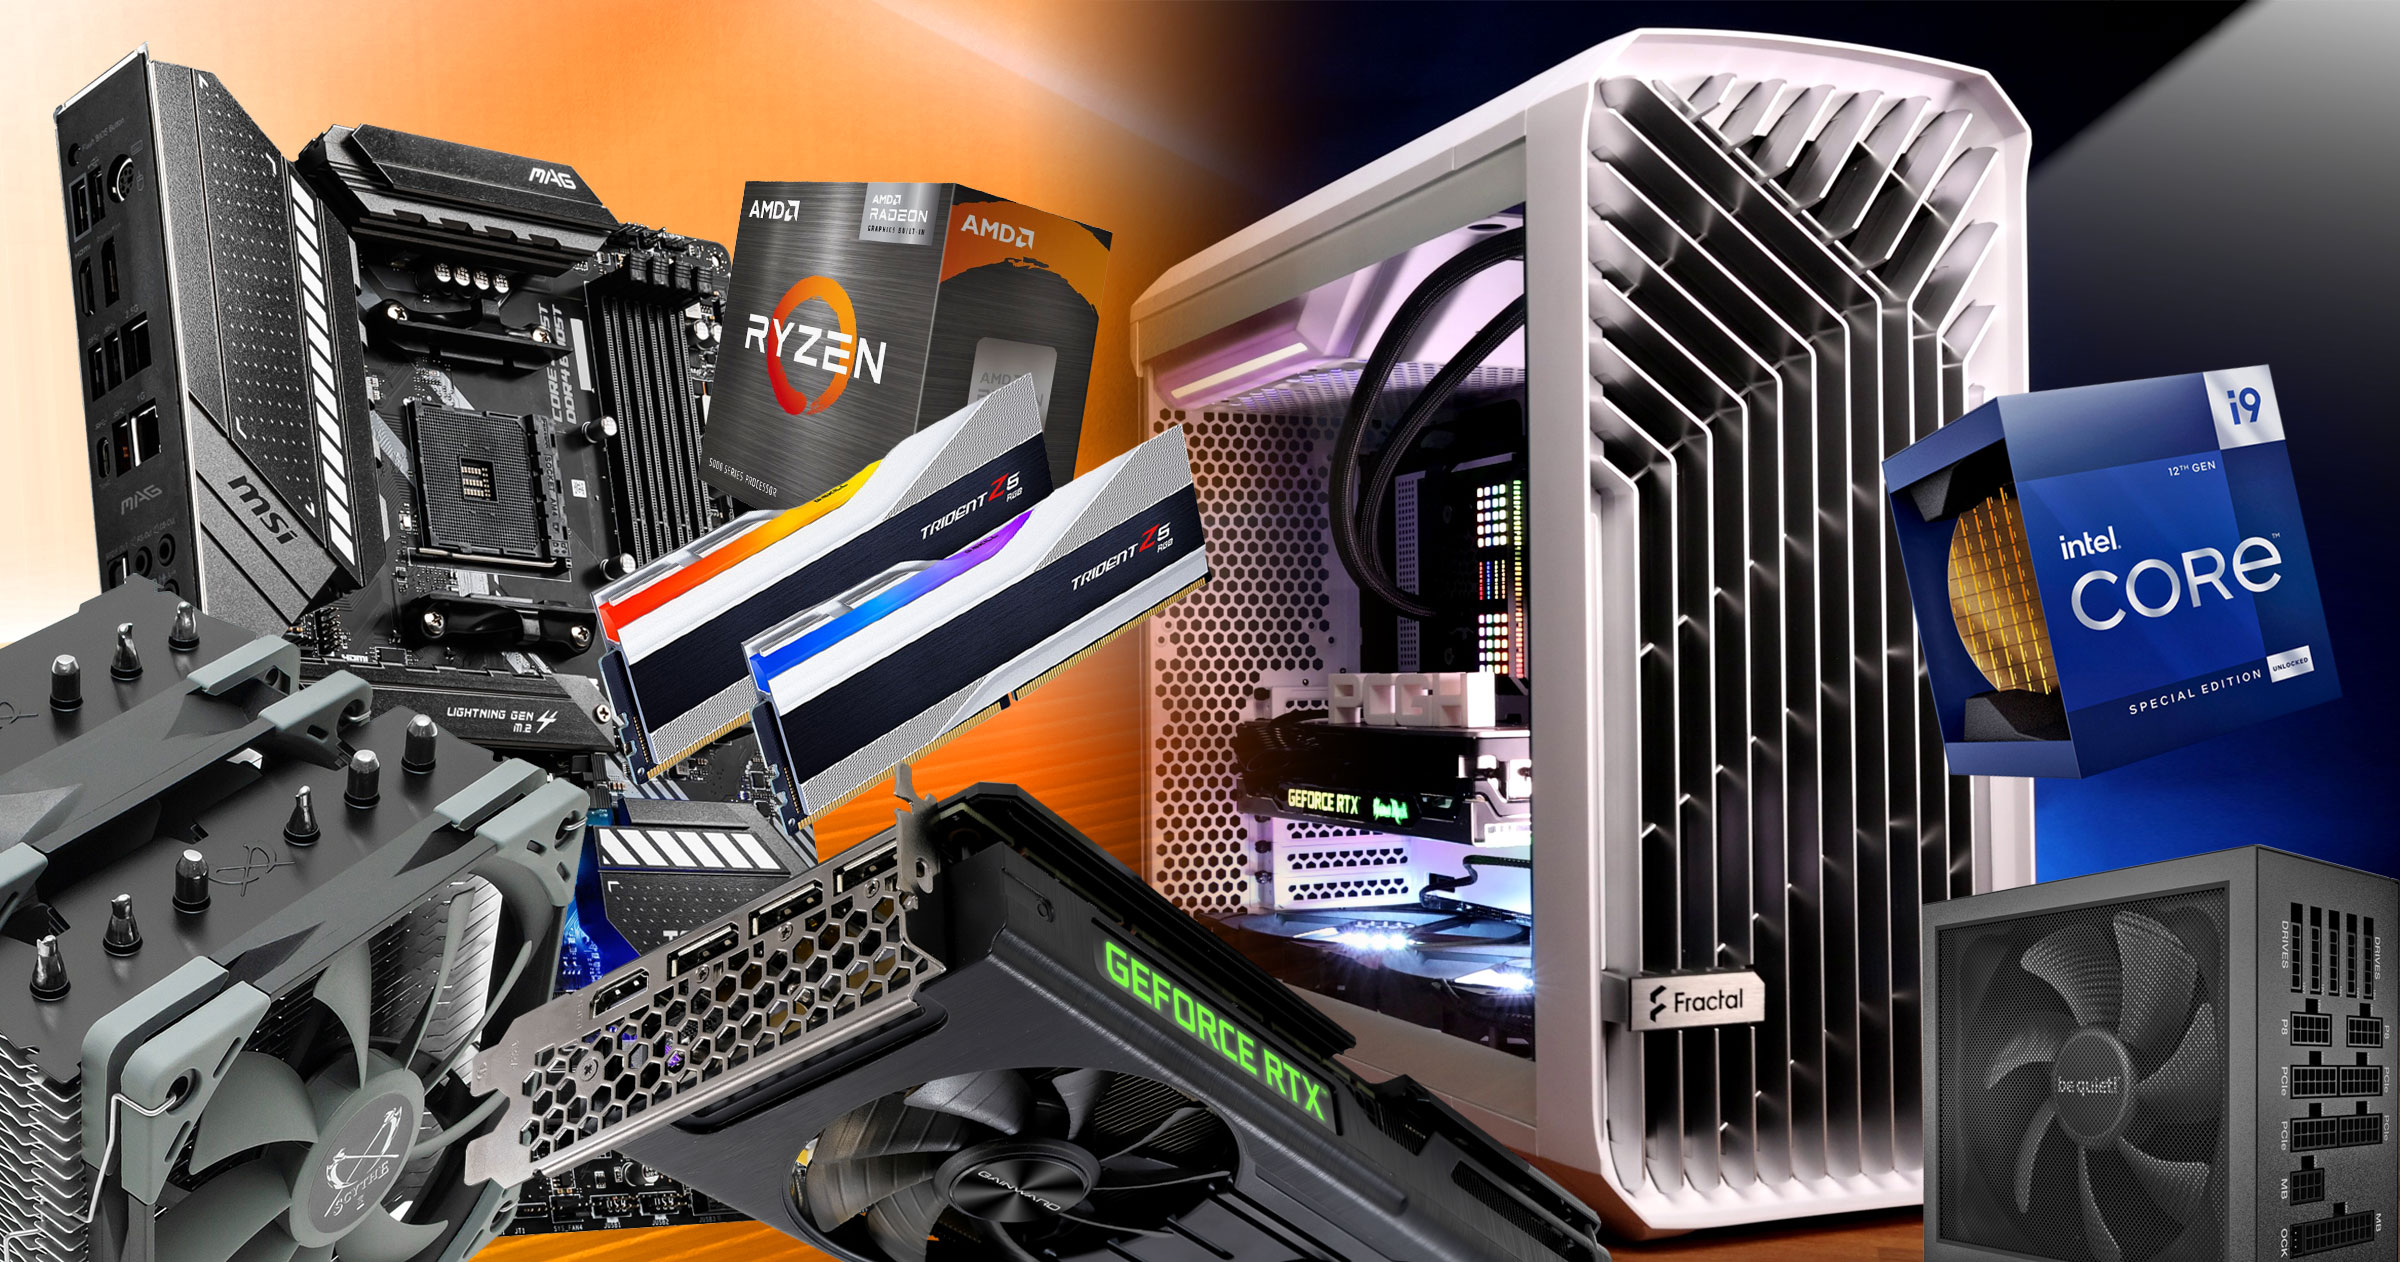 Now on Youtube: Gaming PCs for every budget